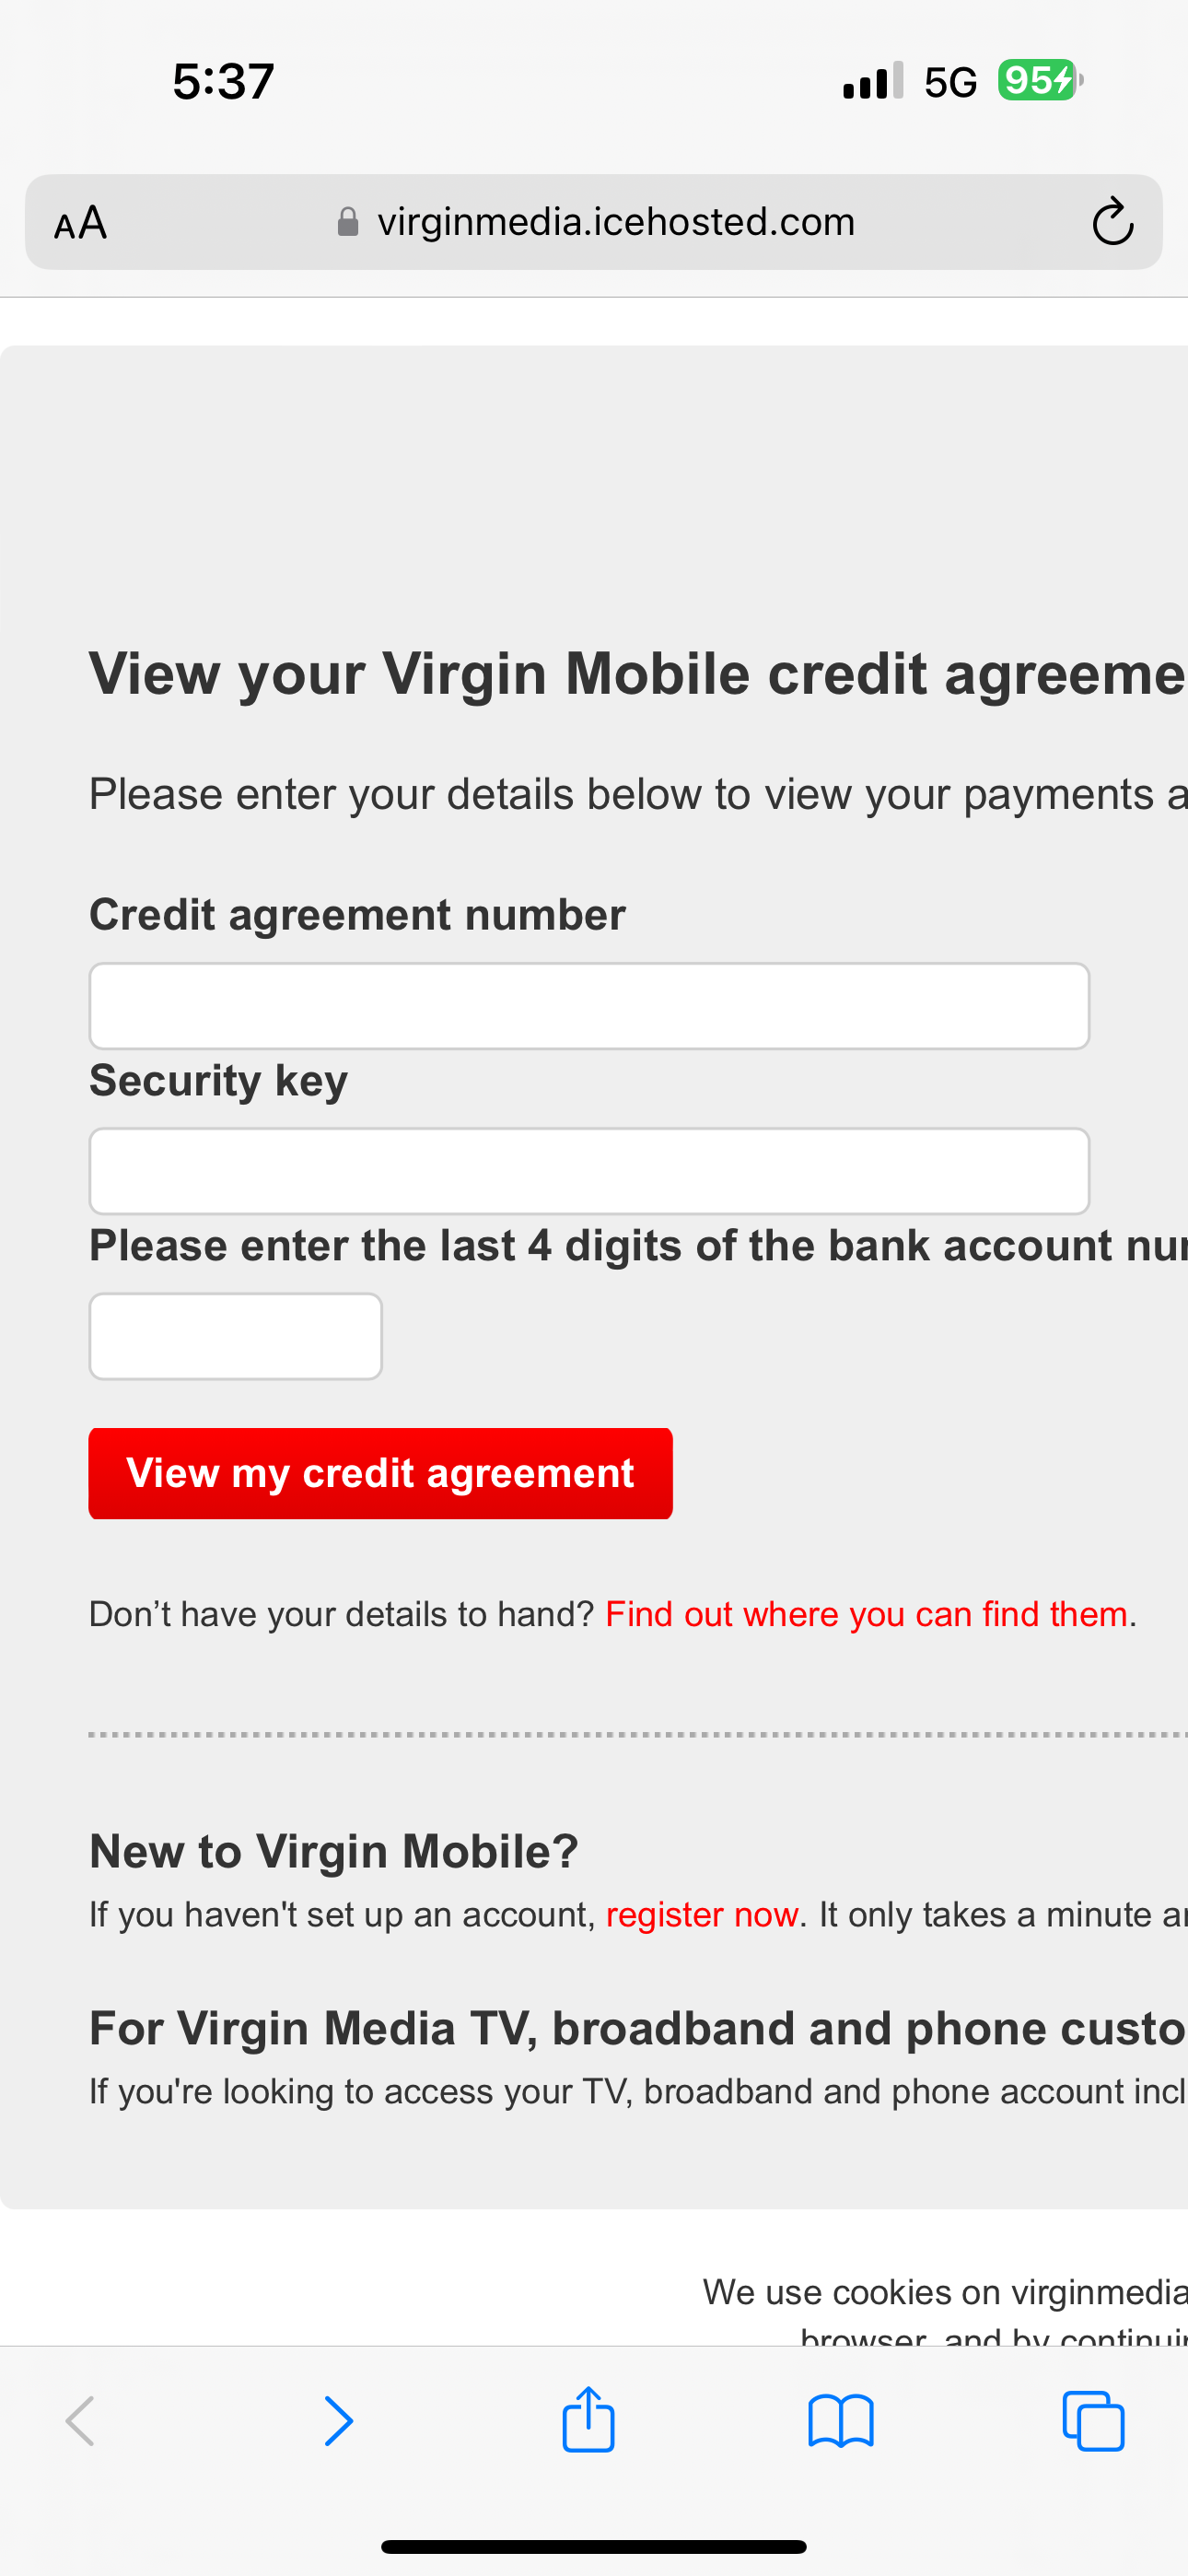 Virgin Media Phone Numbers - How to get in touch